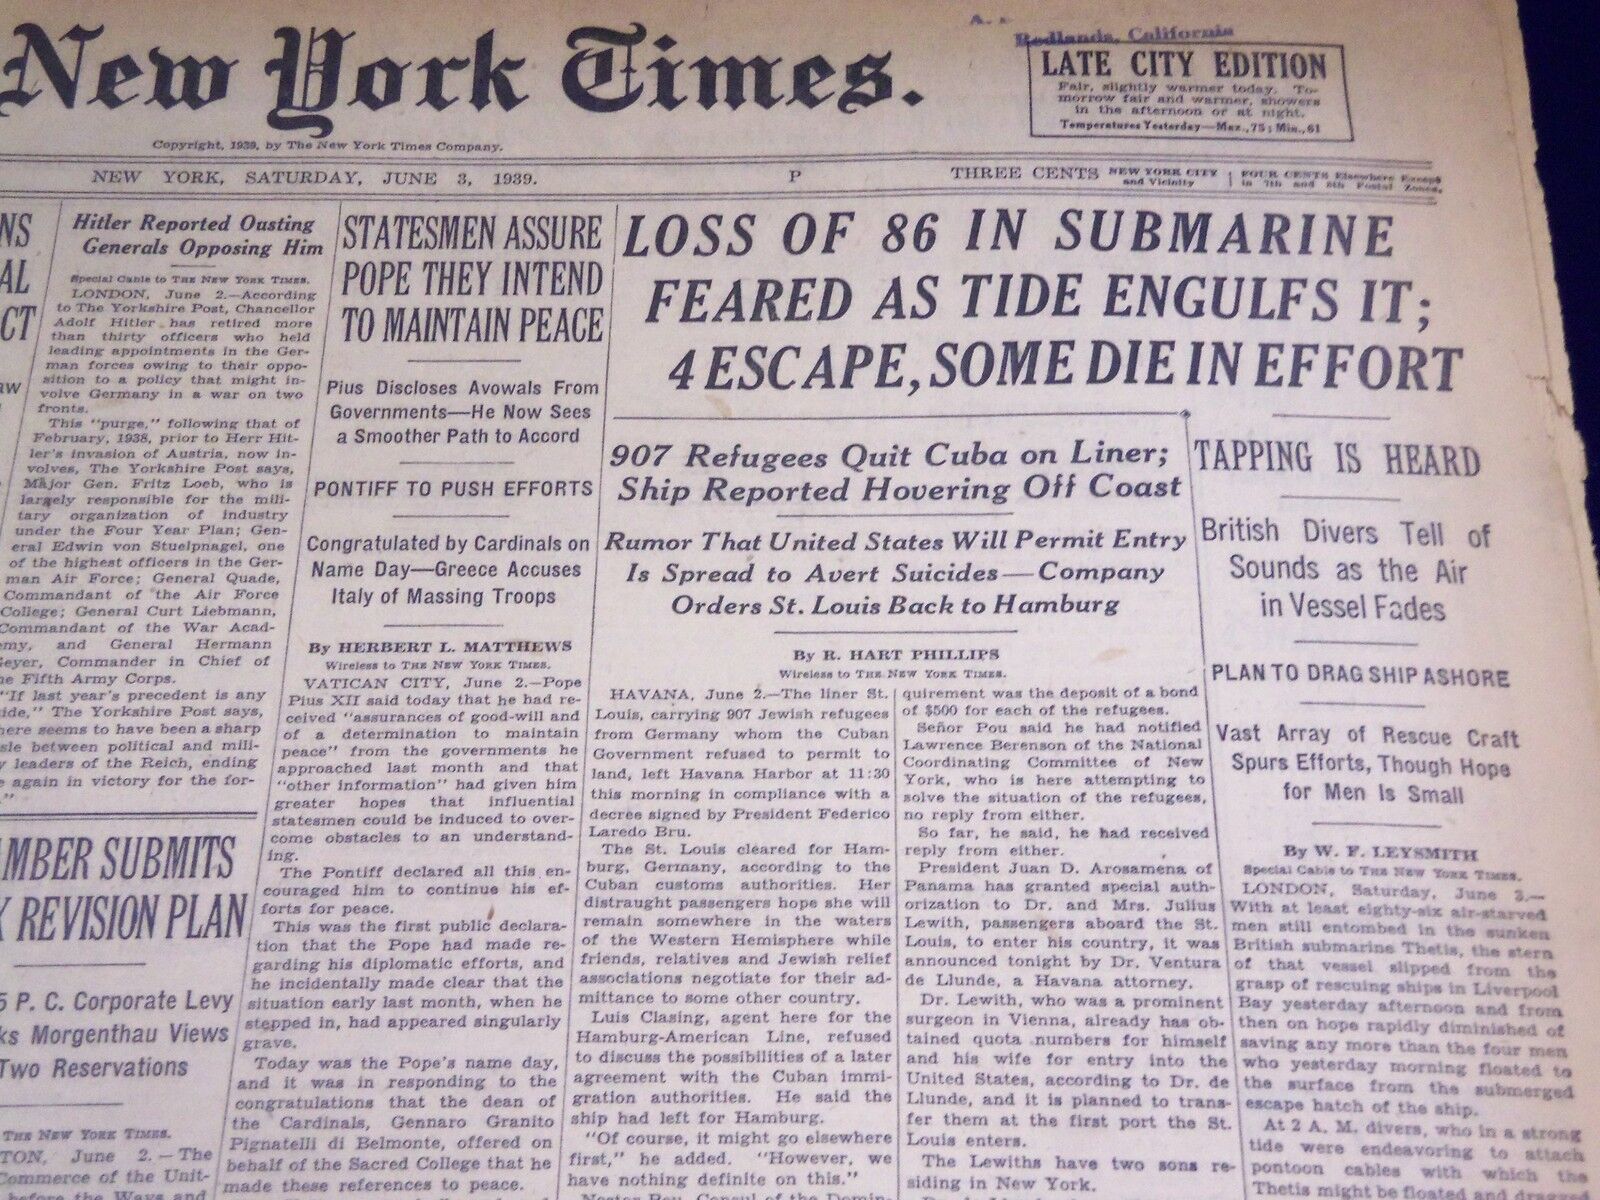 1939 JUNE 3 NEW YORK TIMES - LOSS OF 86 IN SUBMARINE FEARED - NT 1397